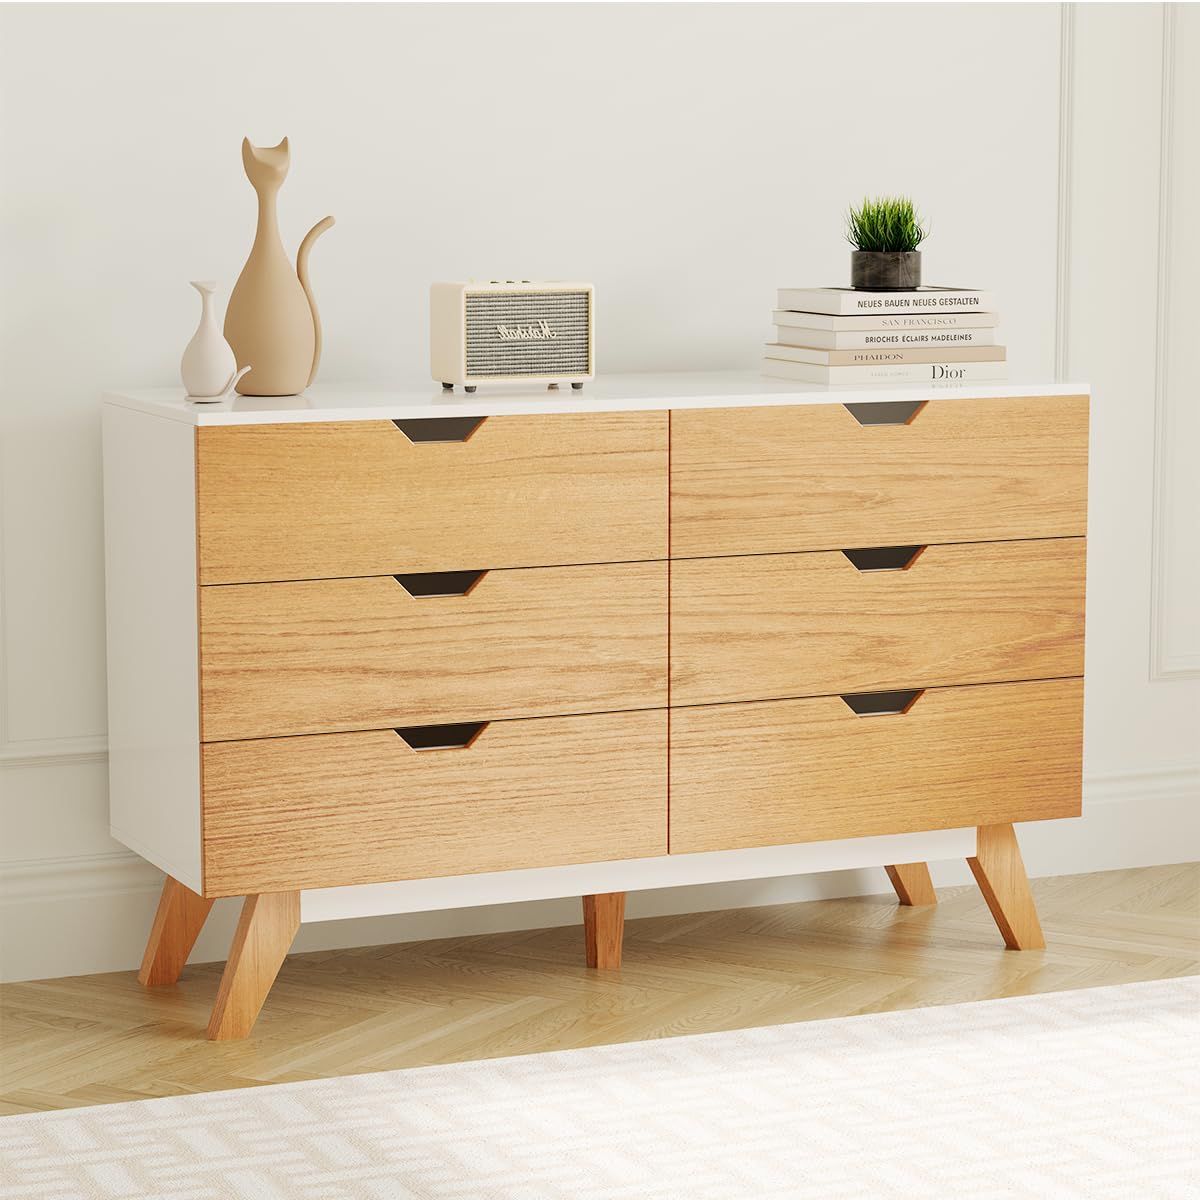 Enhance Your Storage Space with a High-Quality Deep Drawer Chest of Drawers